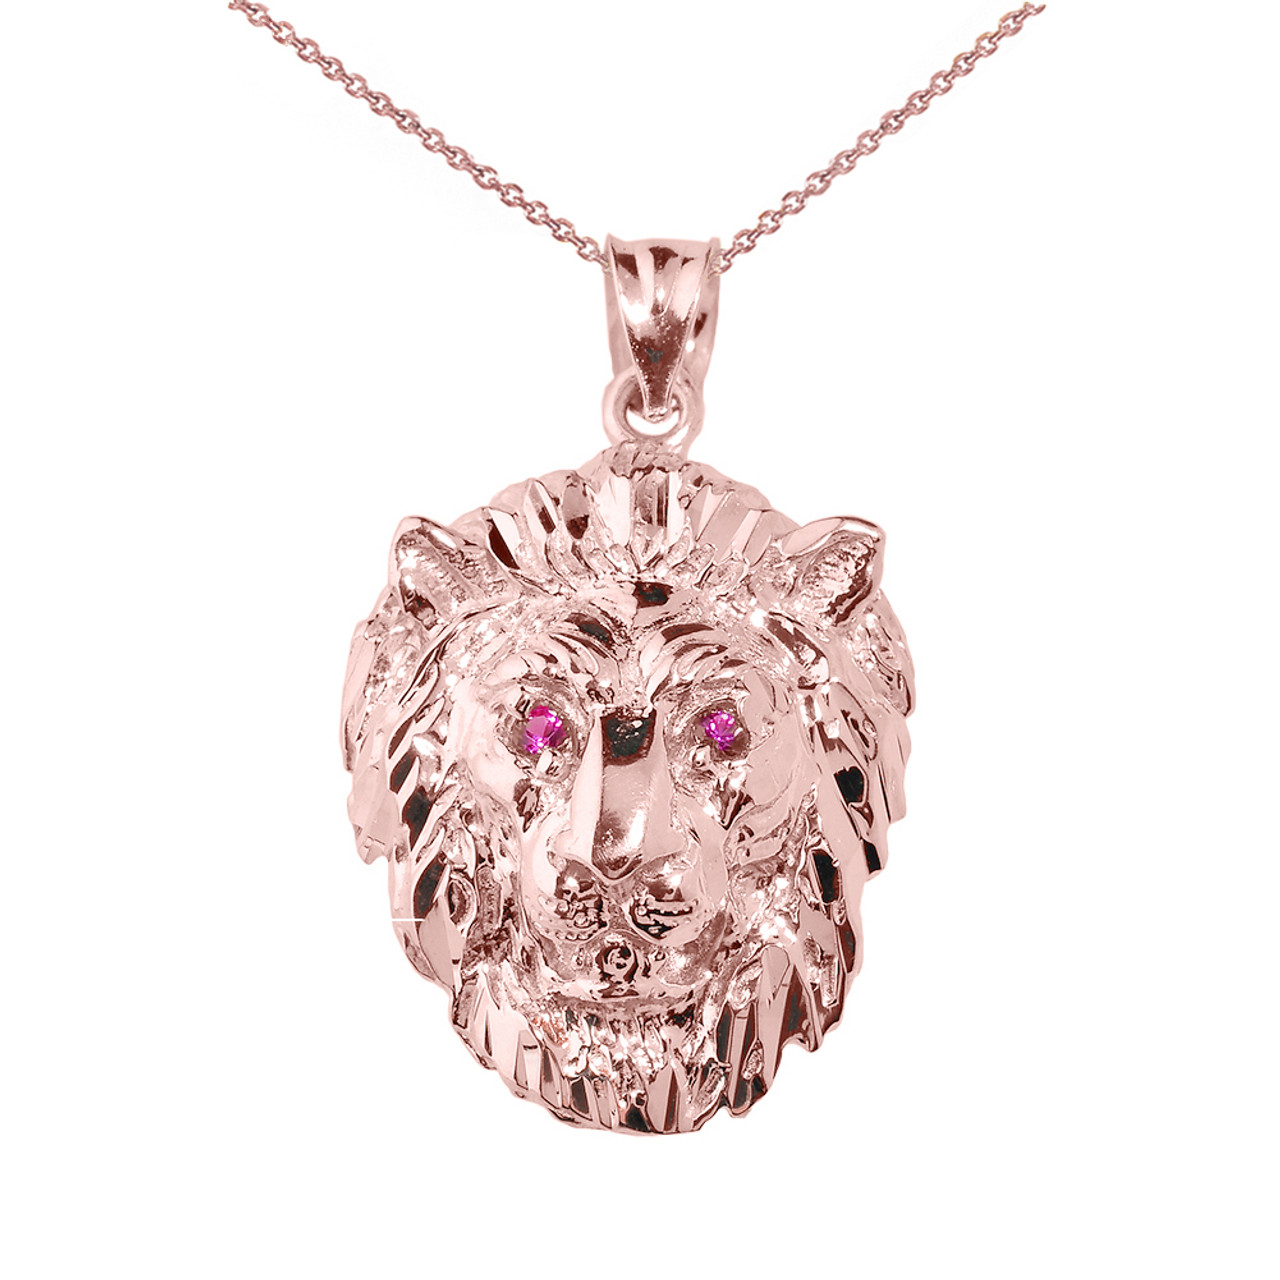 1 1/2 inch Goldtone LION Head Necklace Urban Glam-Celebrity Inspired-24 inches